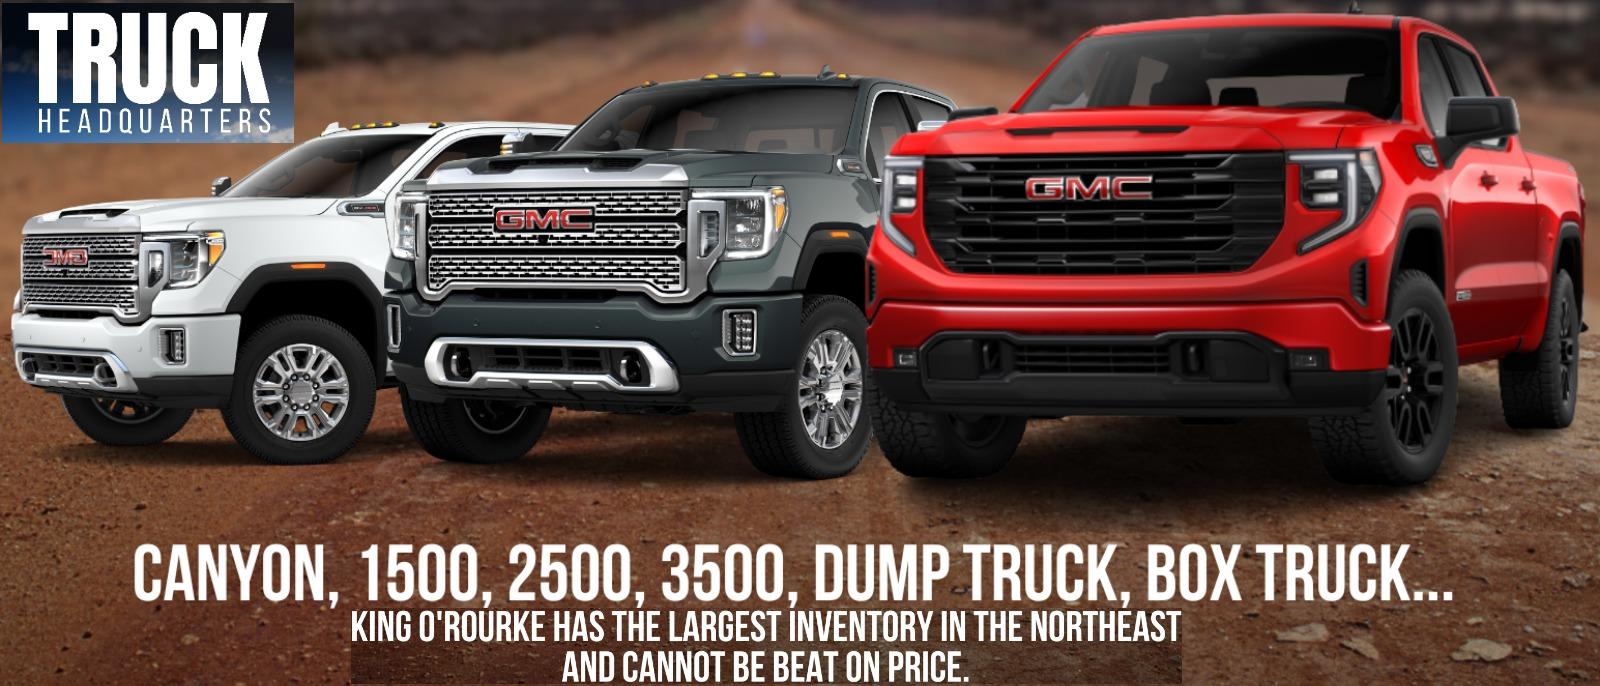 KING O'ROURKE - YOUR ULTIMATE TRUCK HEADQUARTERS